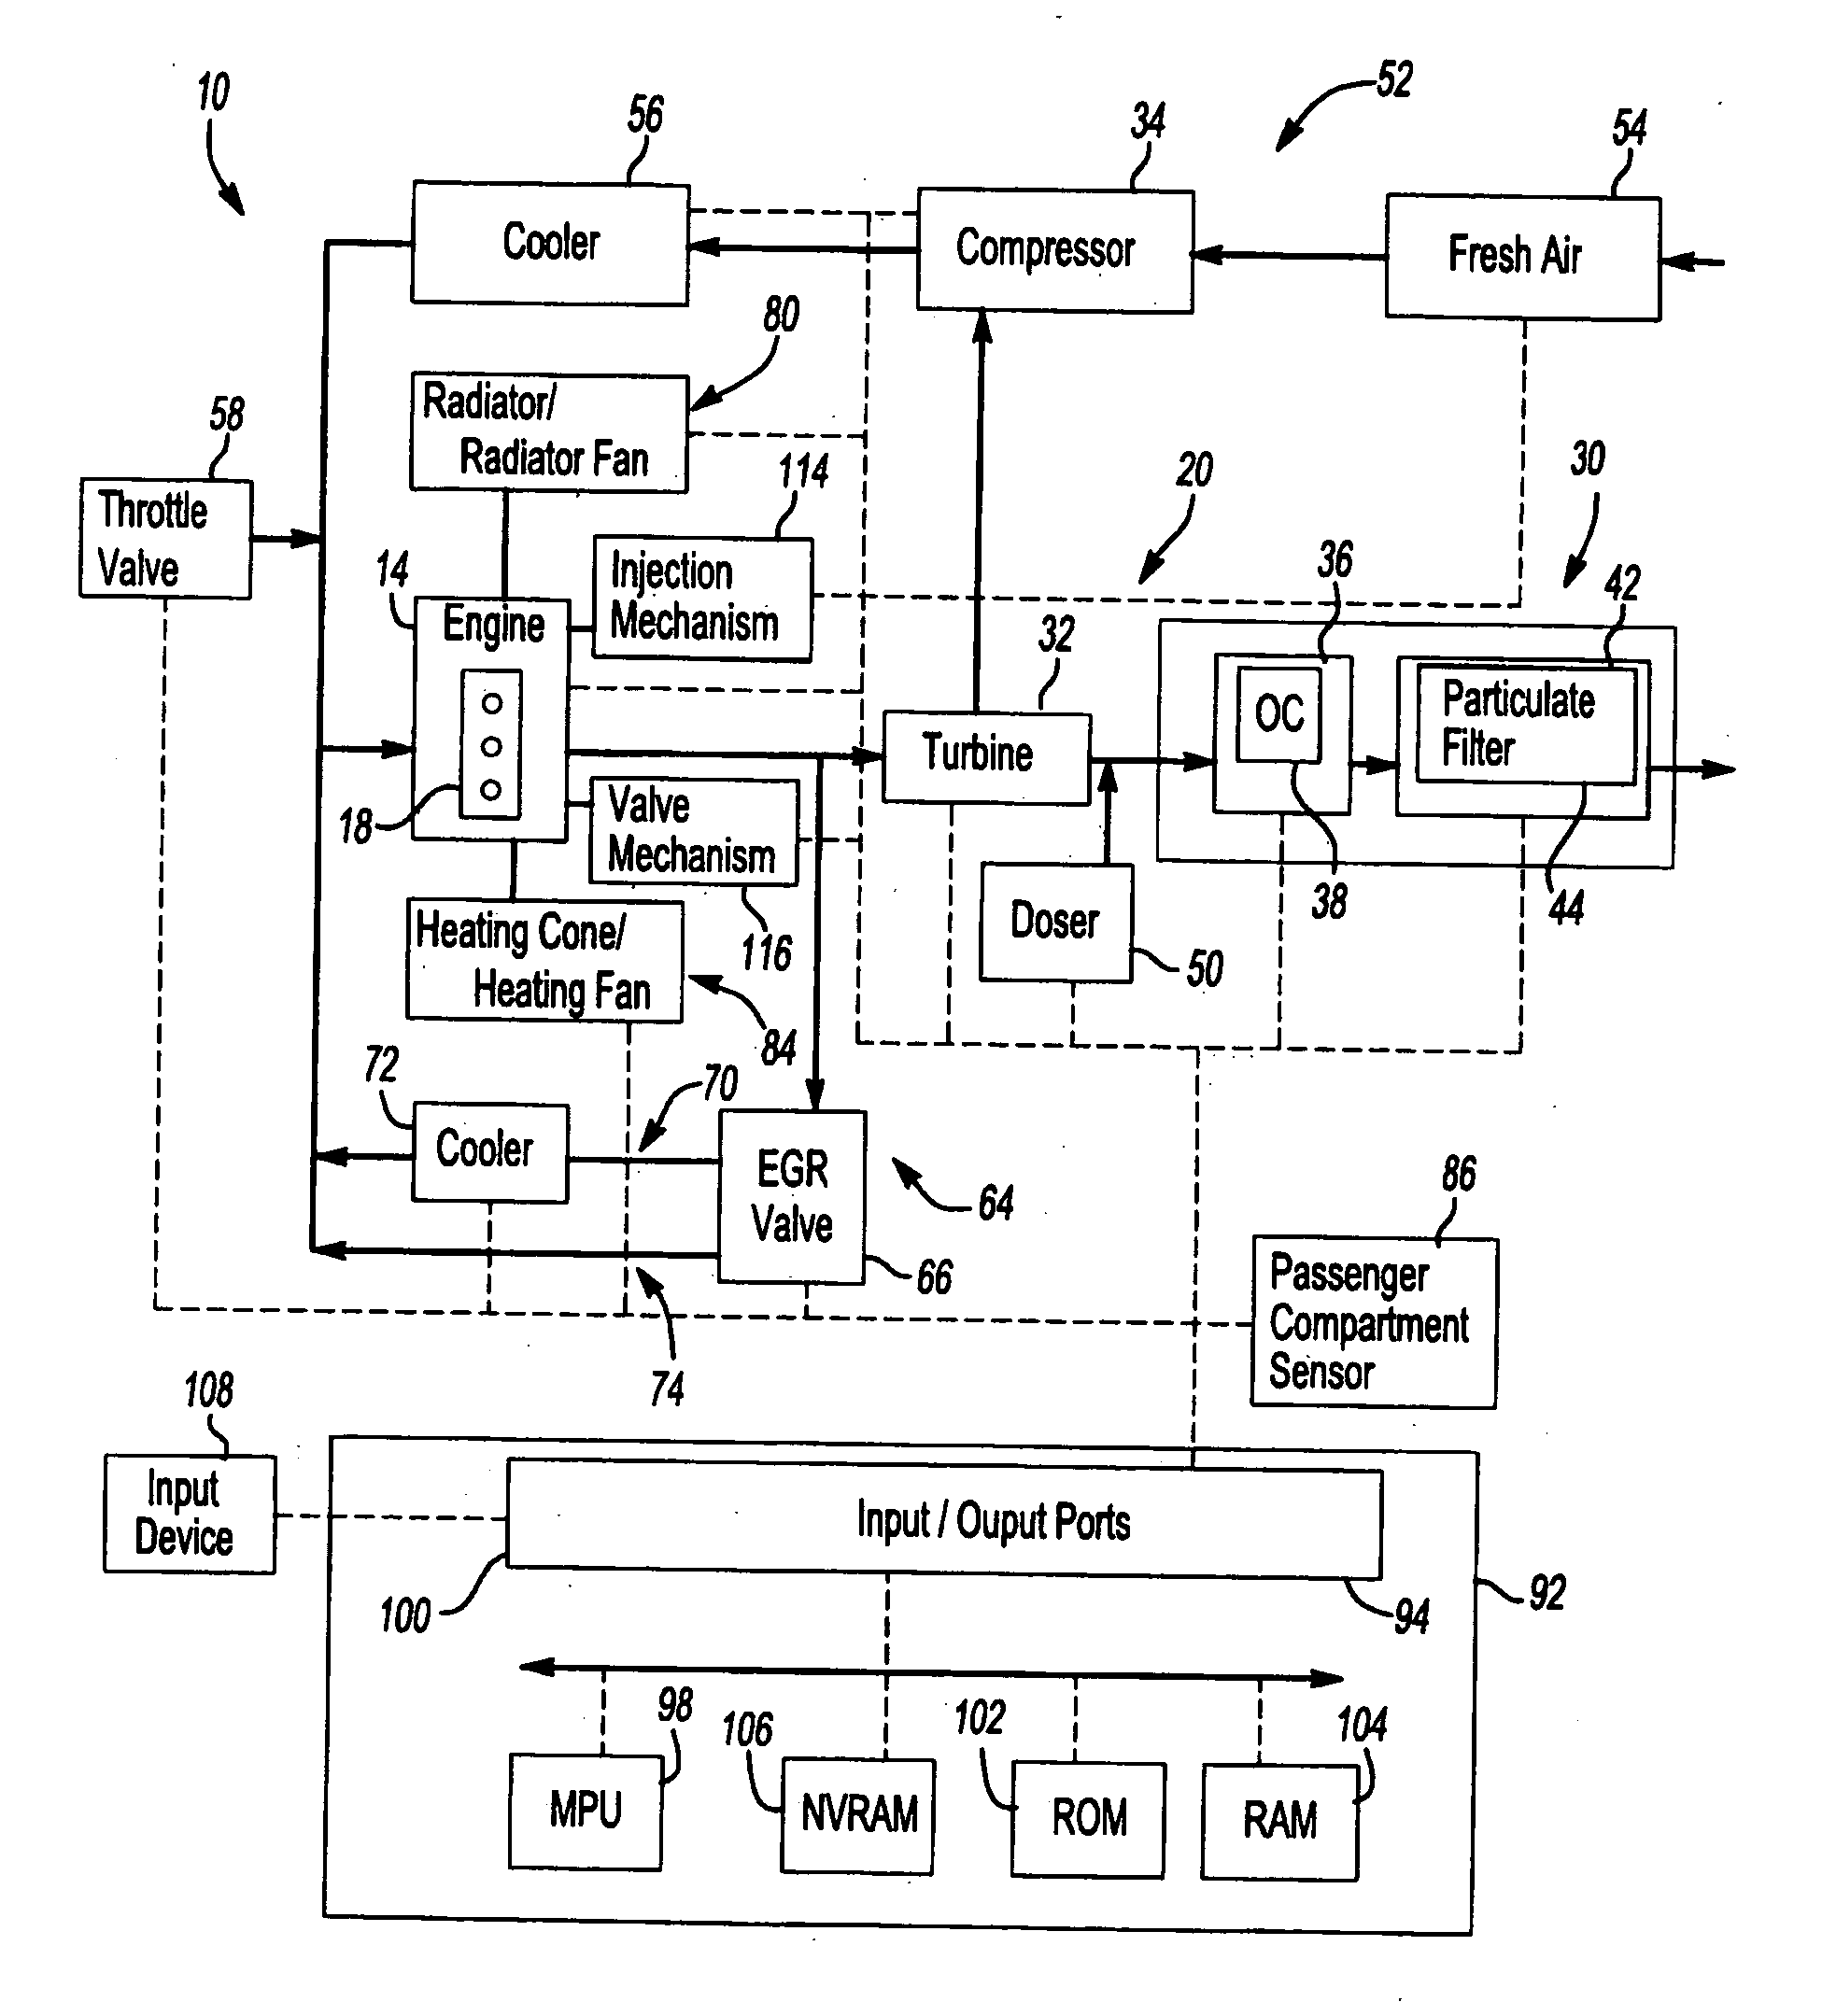 Method and system for controlling temperatures of exhaust gases emitted from an internal combustion engine to facilitate regeneration of a particulate filter